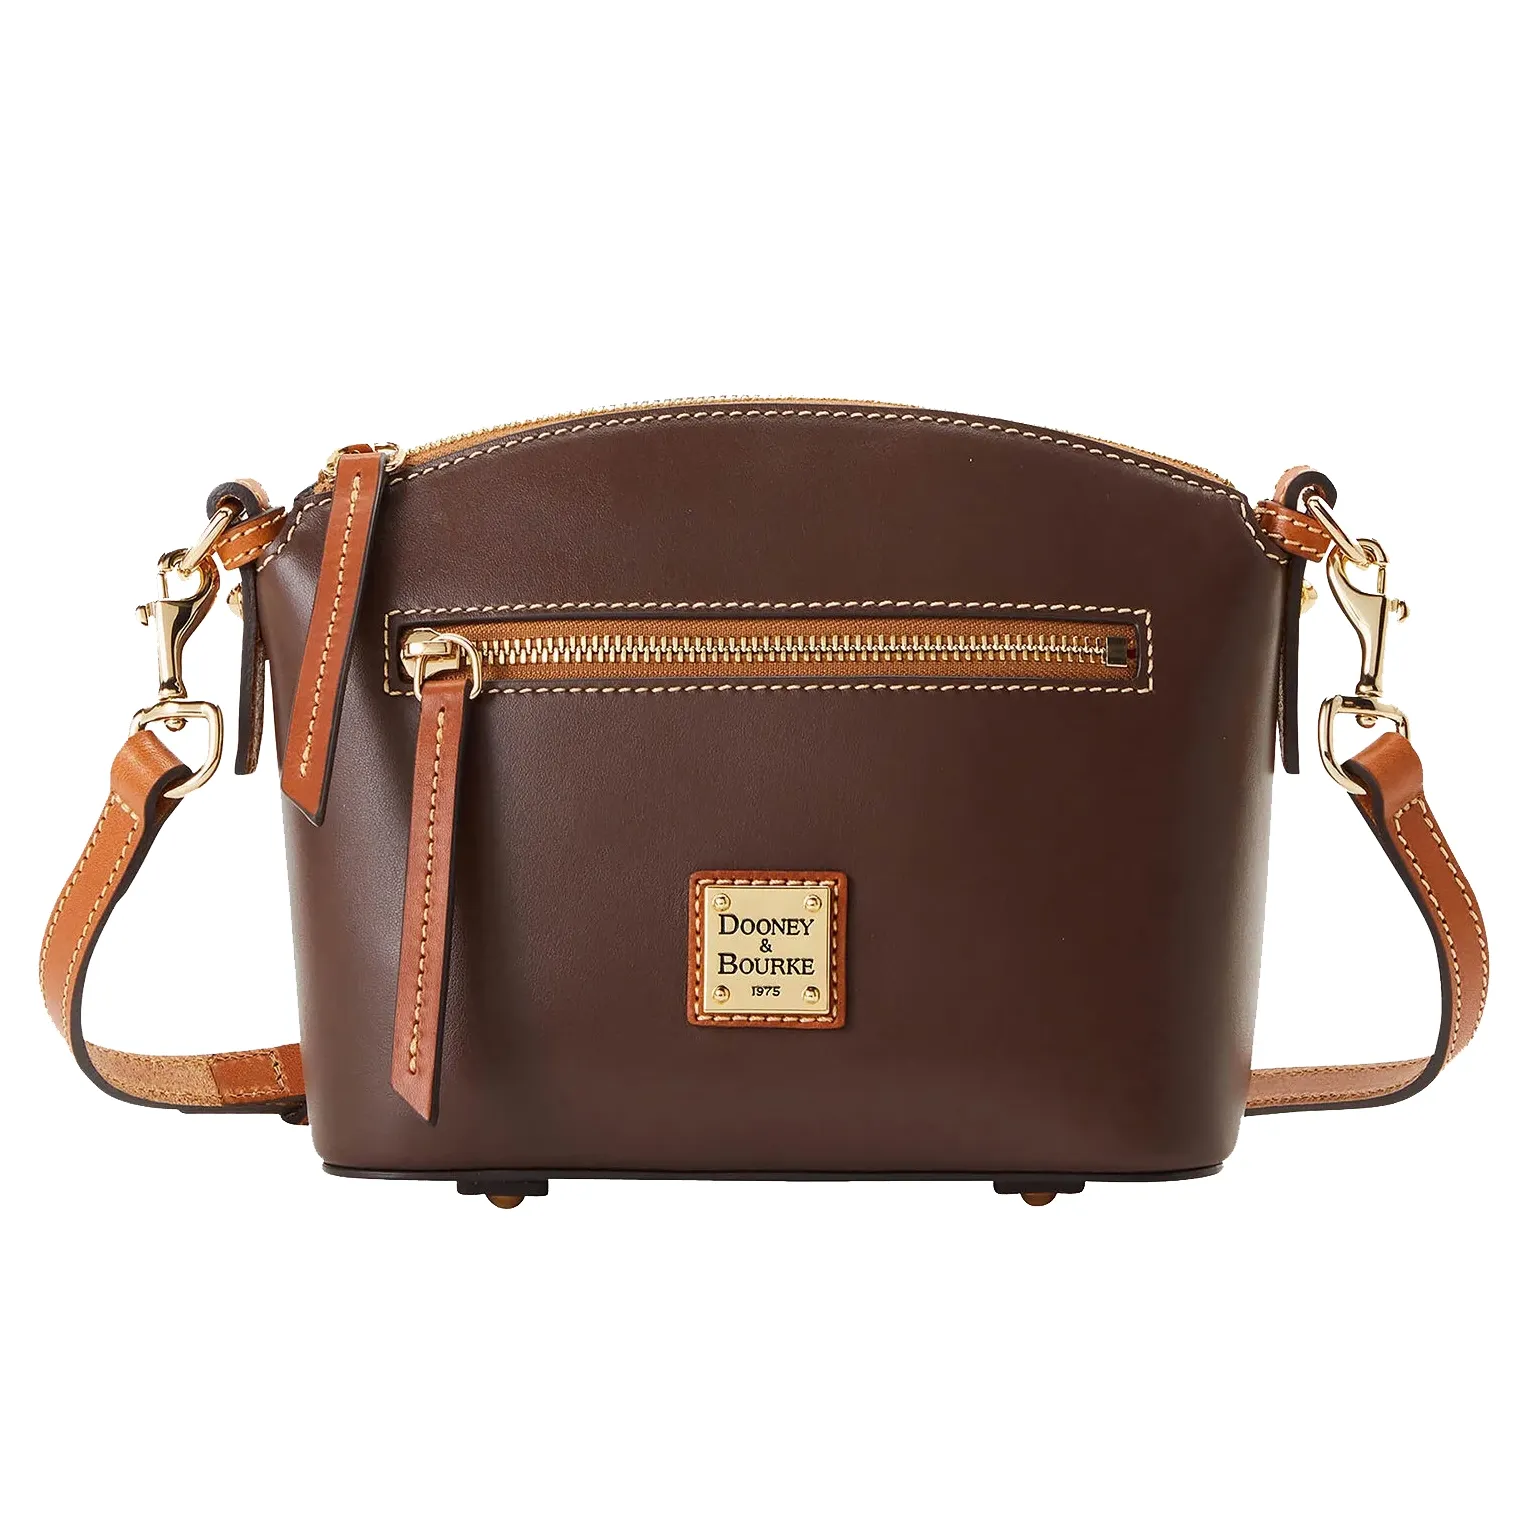 A brown leather crossbody bag with a front zipper pocket and a tan strap.